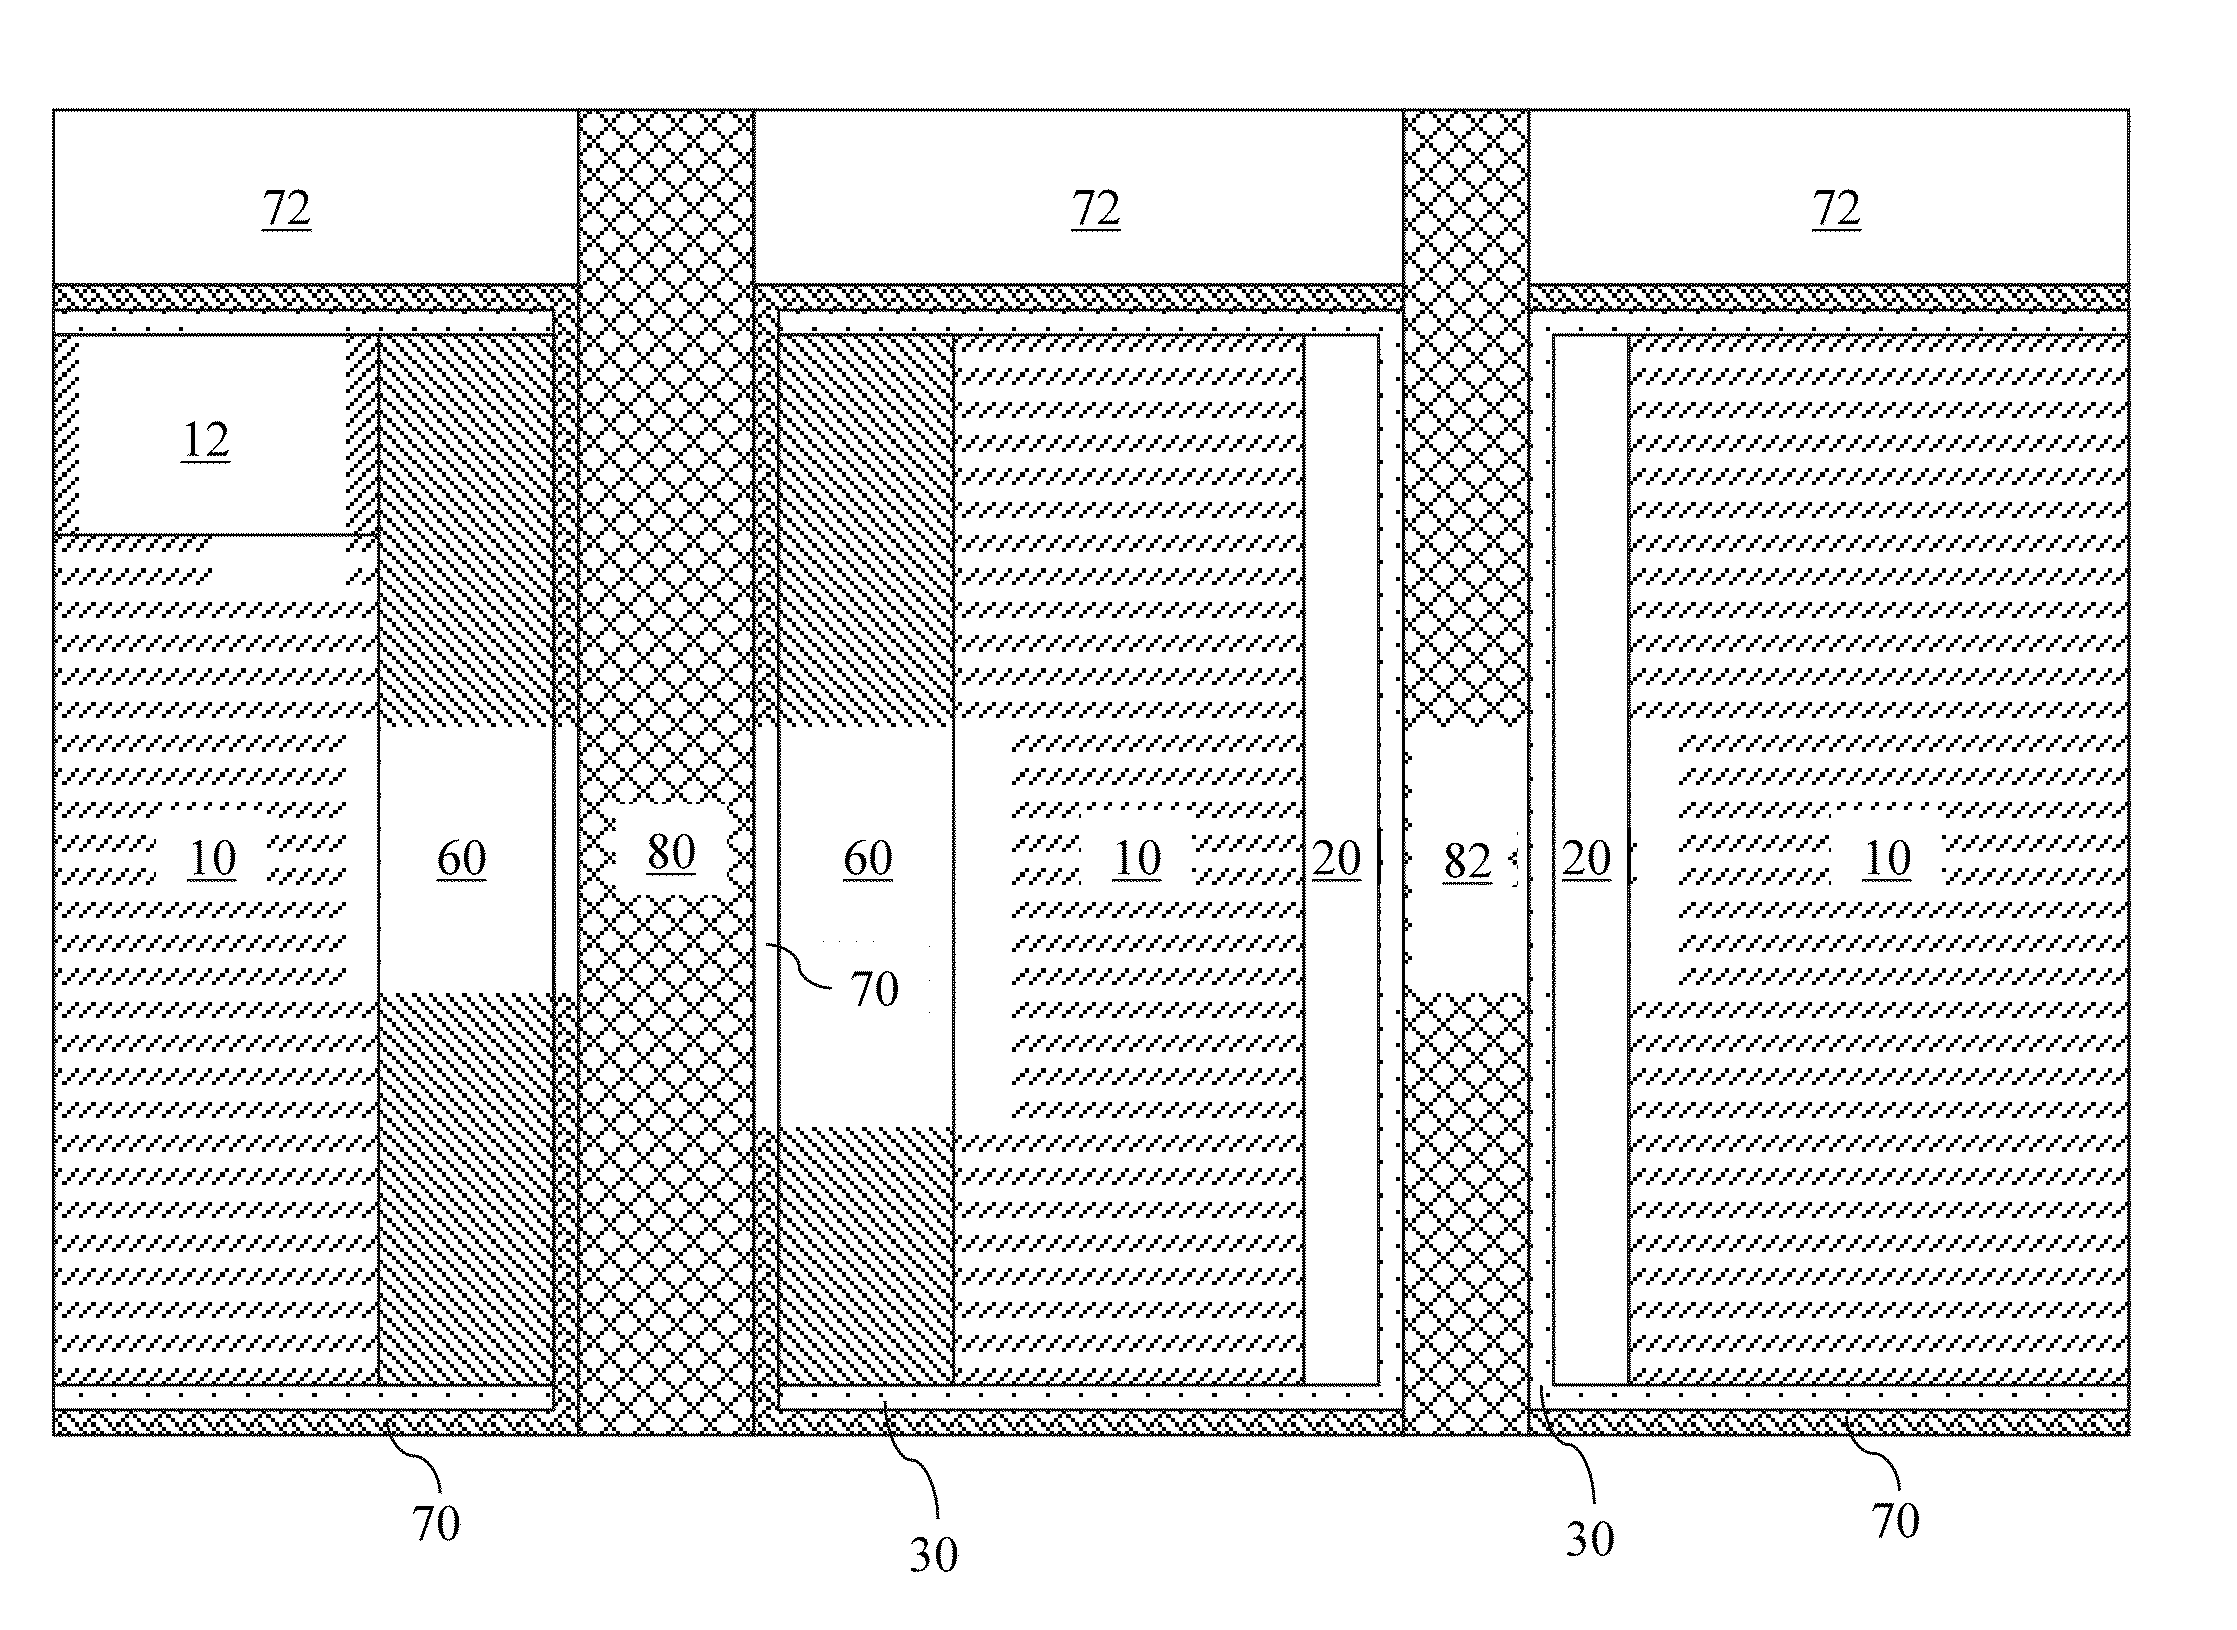 Integrated decoupling capacitor employing conductive through-substrate vias